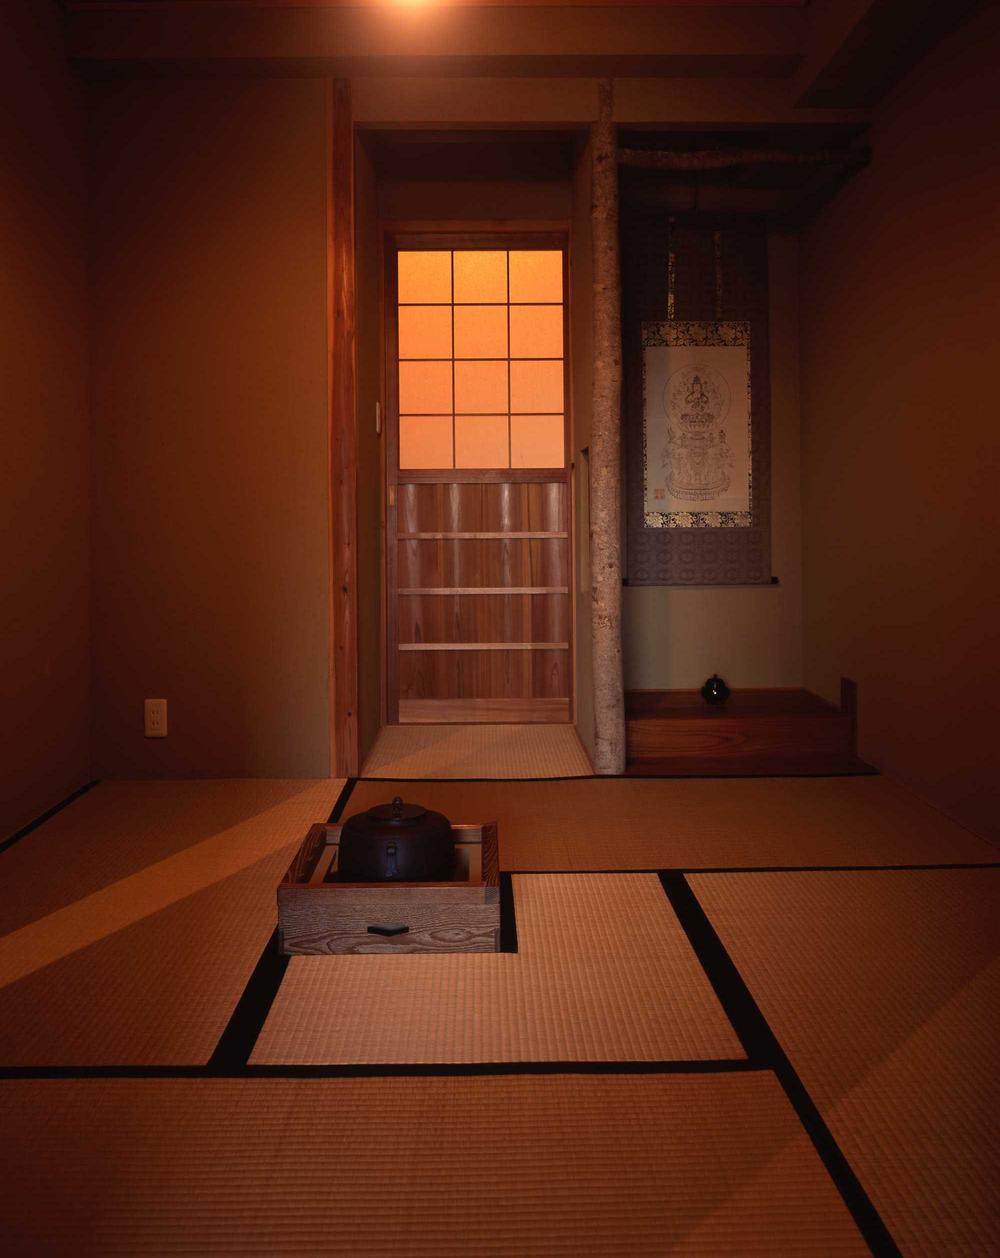 Non-living room. Contact is a teahouse specification of Japanese-style room